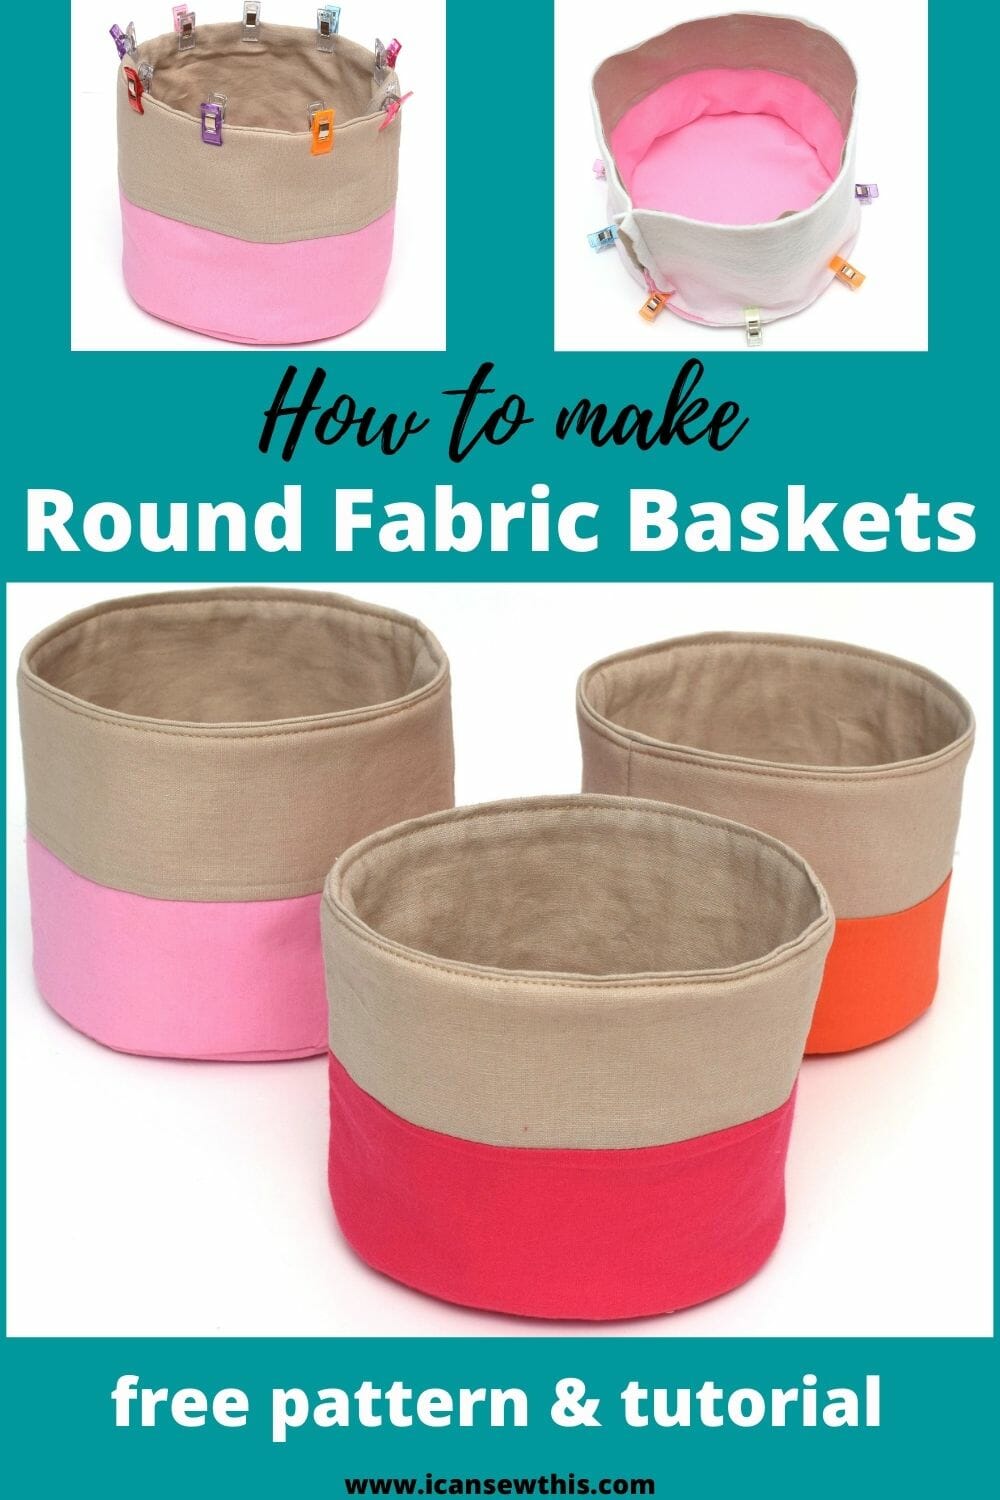 How To Make Round Fabric Baskets Free